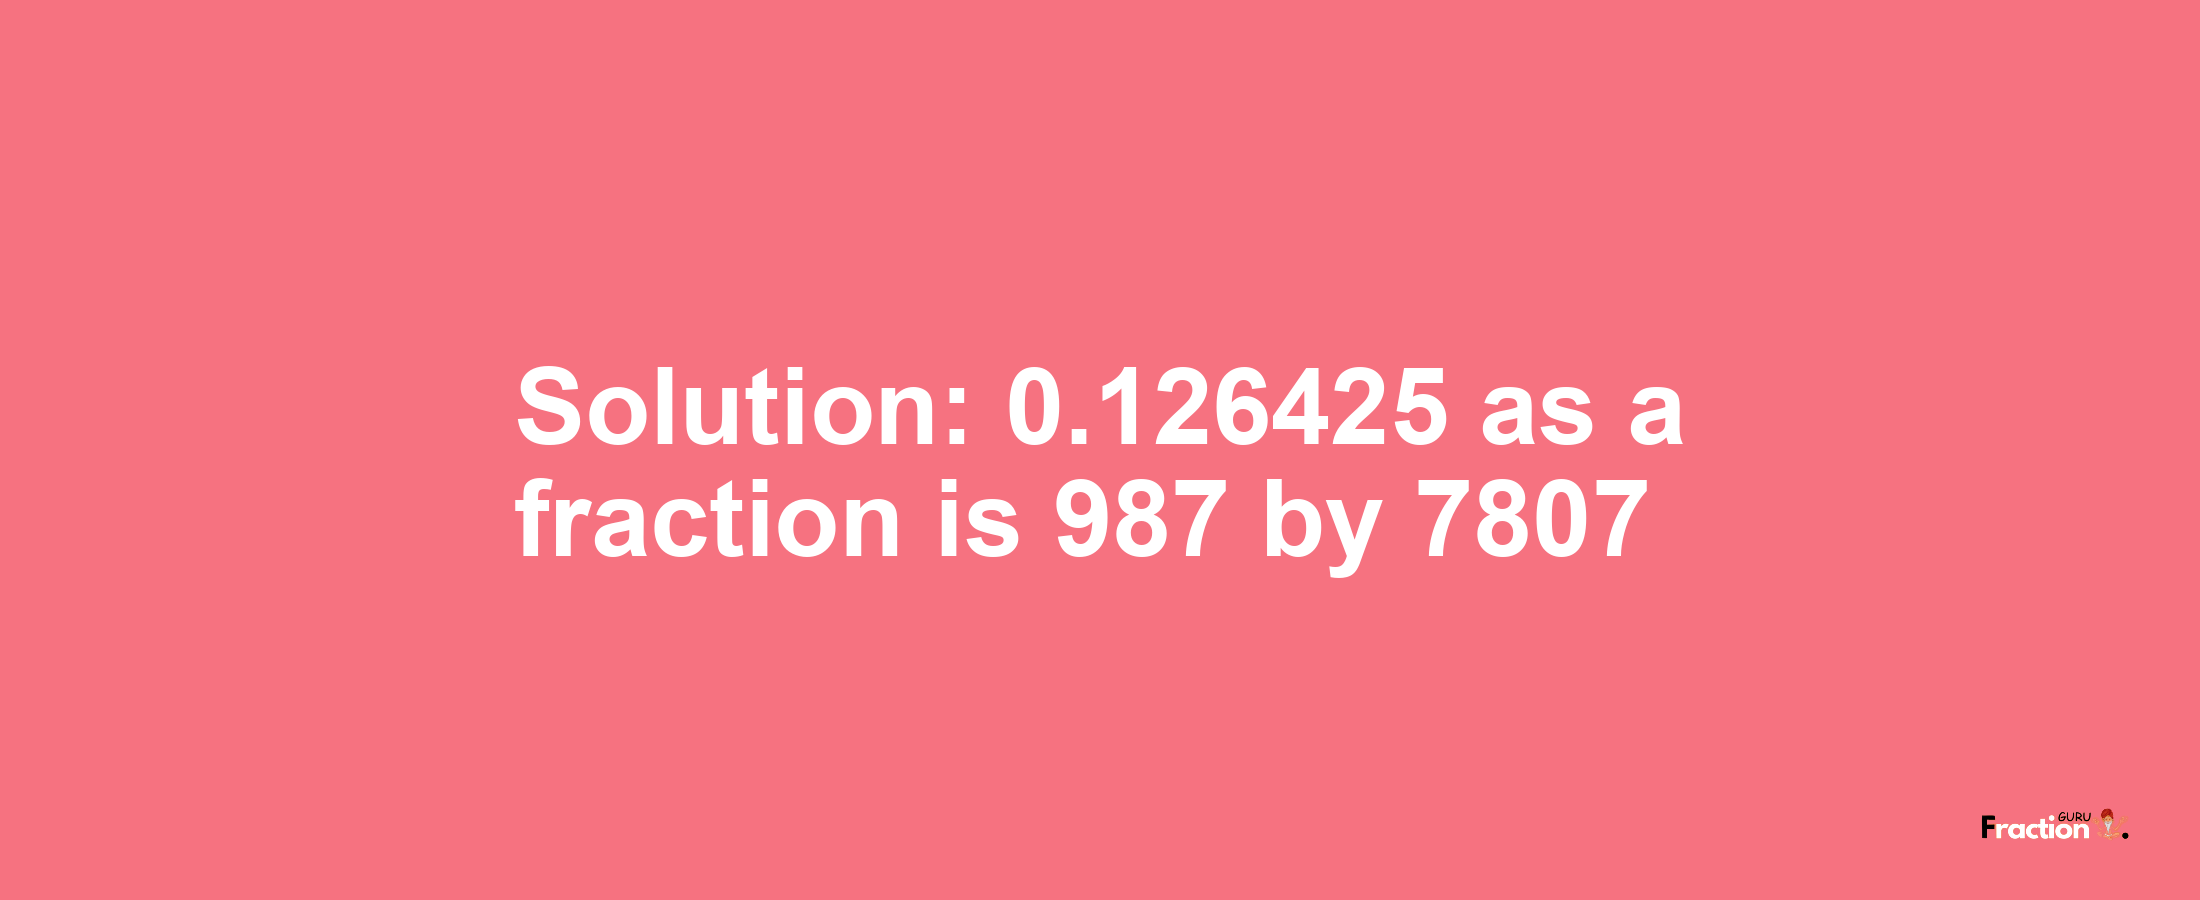 Solution:0.126425 as a fraction is 987/7807